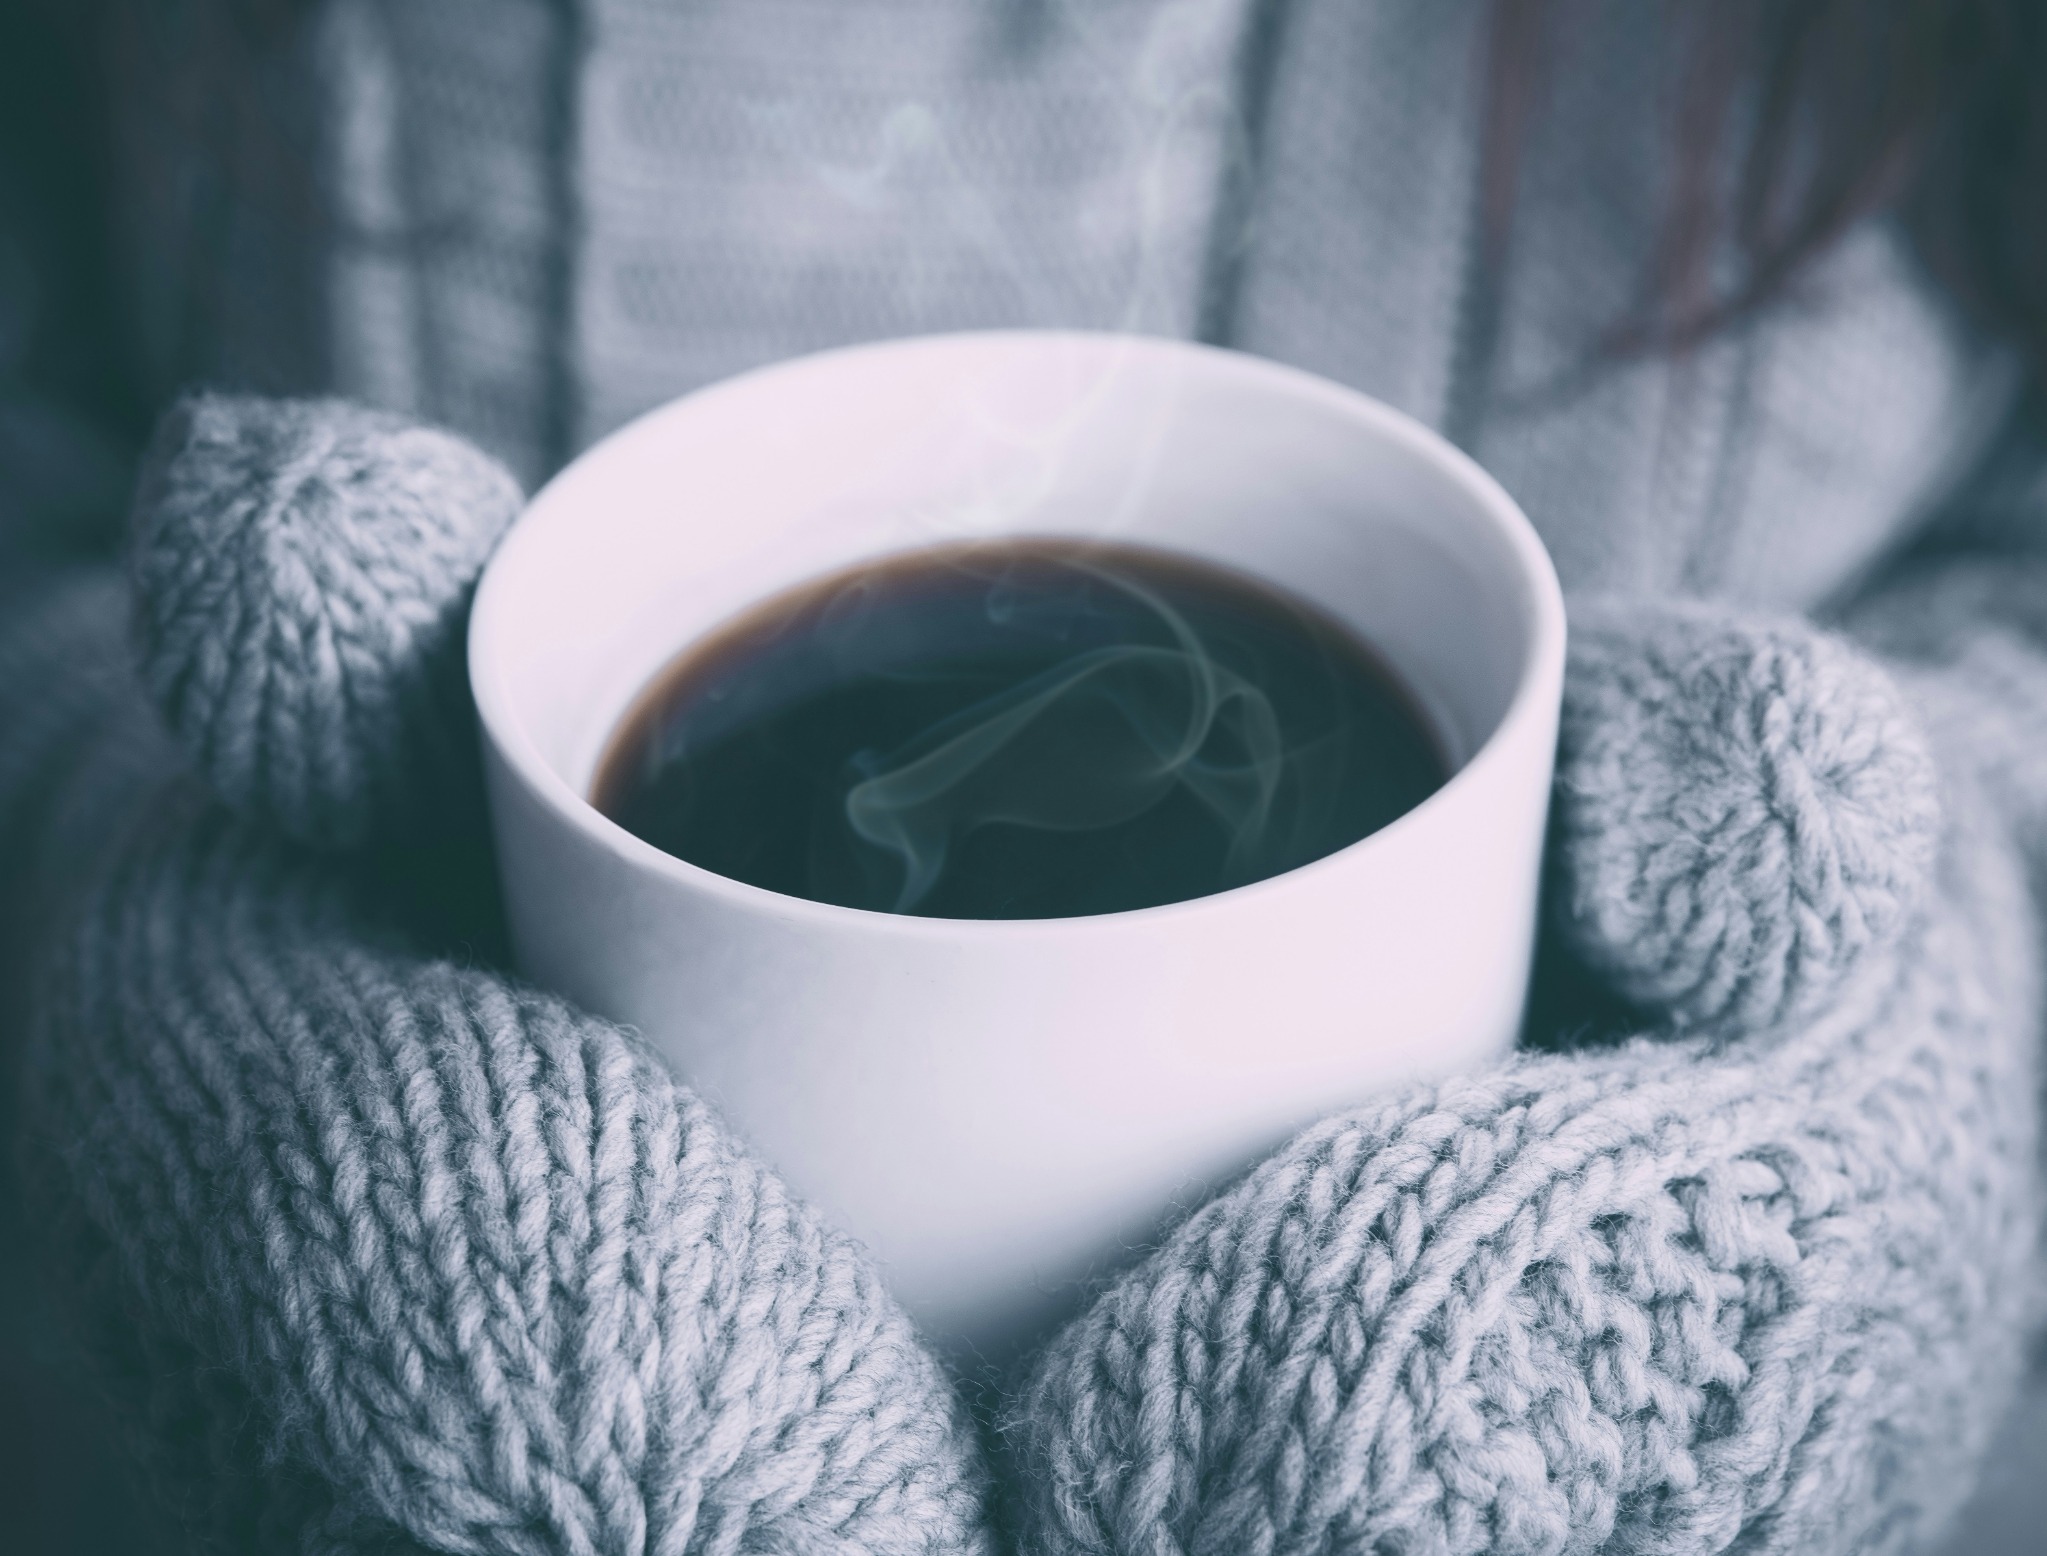 Cozy sweater steaming coffee cup